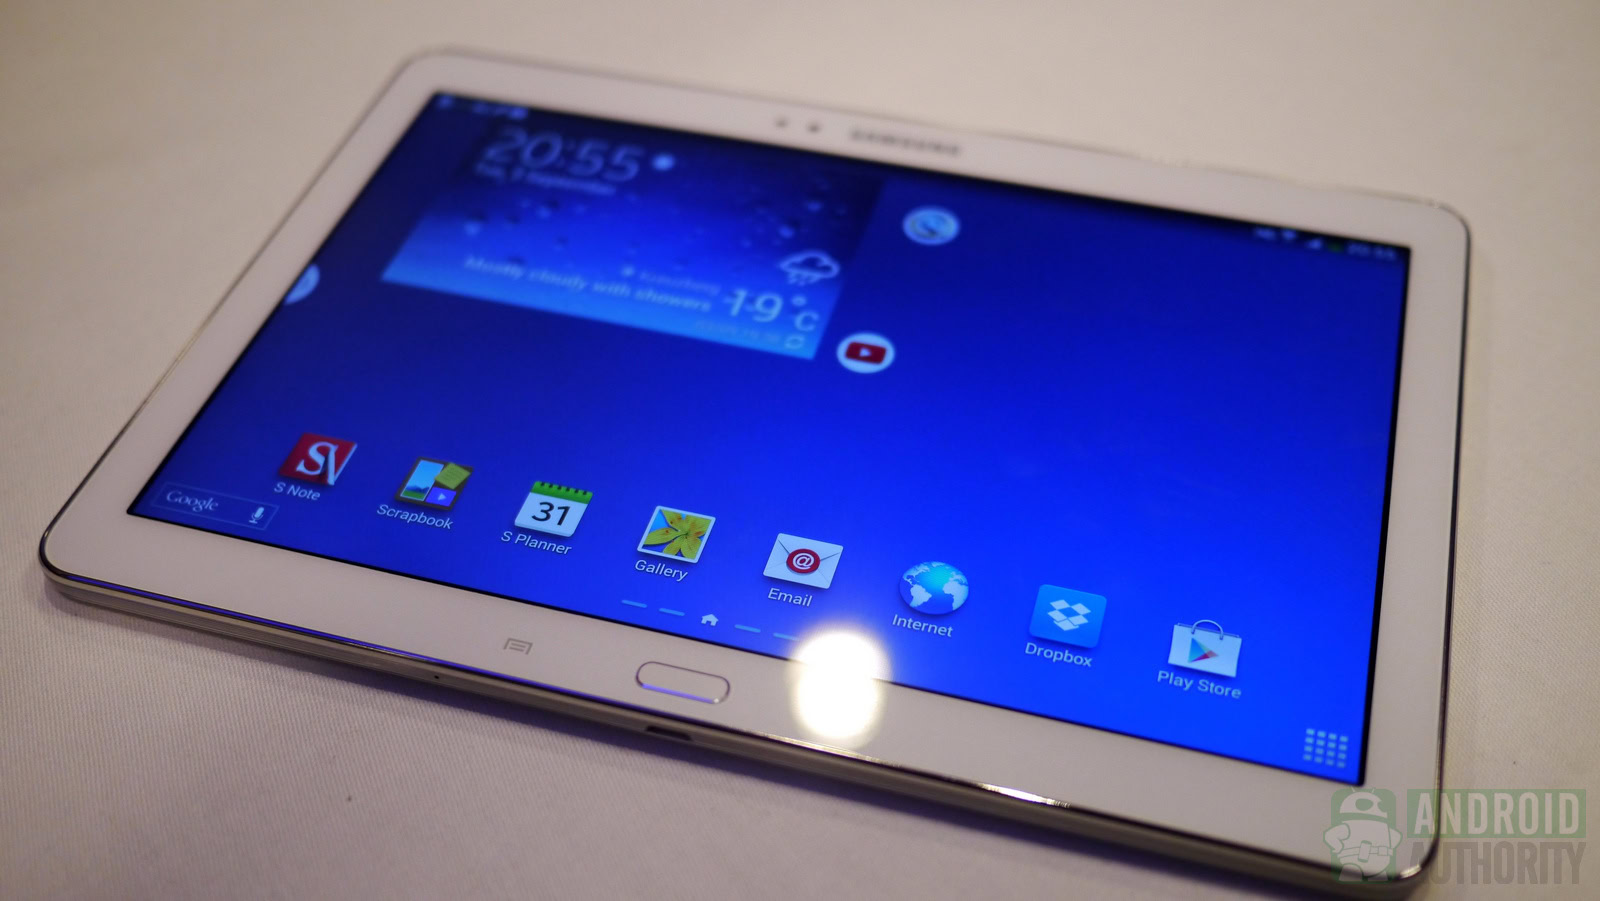 eeuwig bodem Mellow Samsung Galaxy Note 10.1 (2014 edition) specs, features, release date and  pricing official